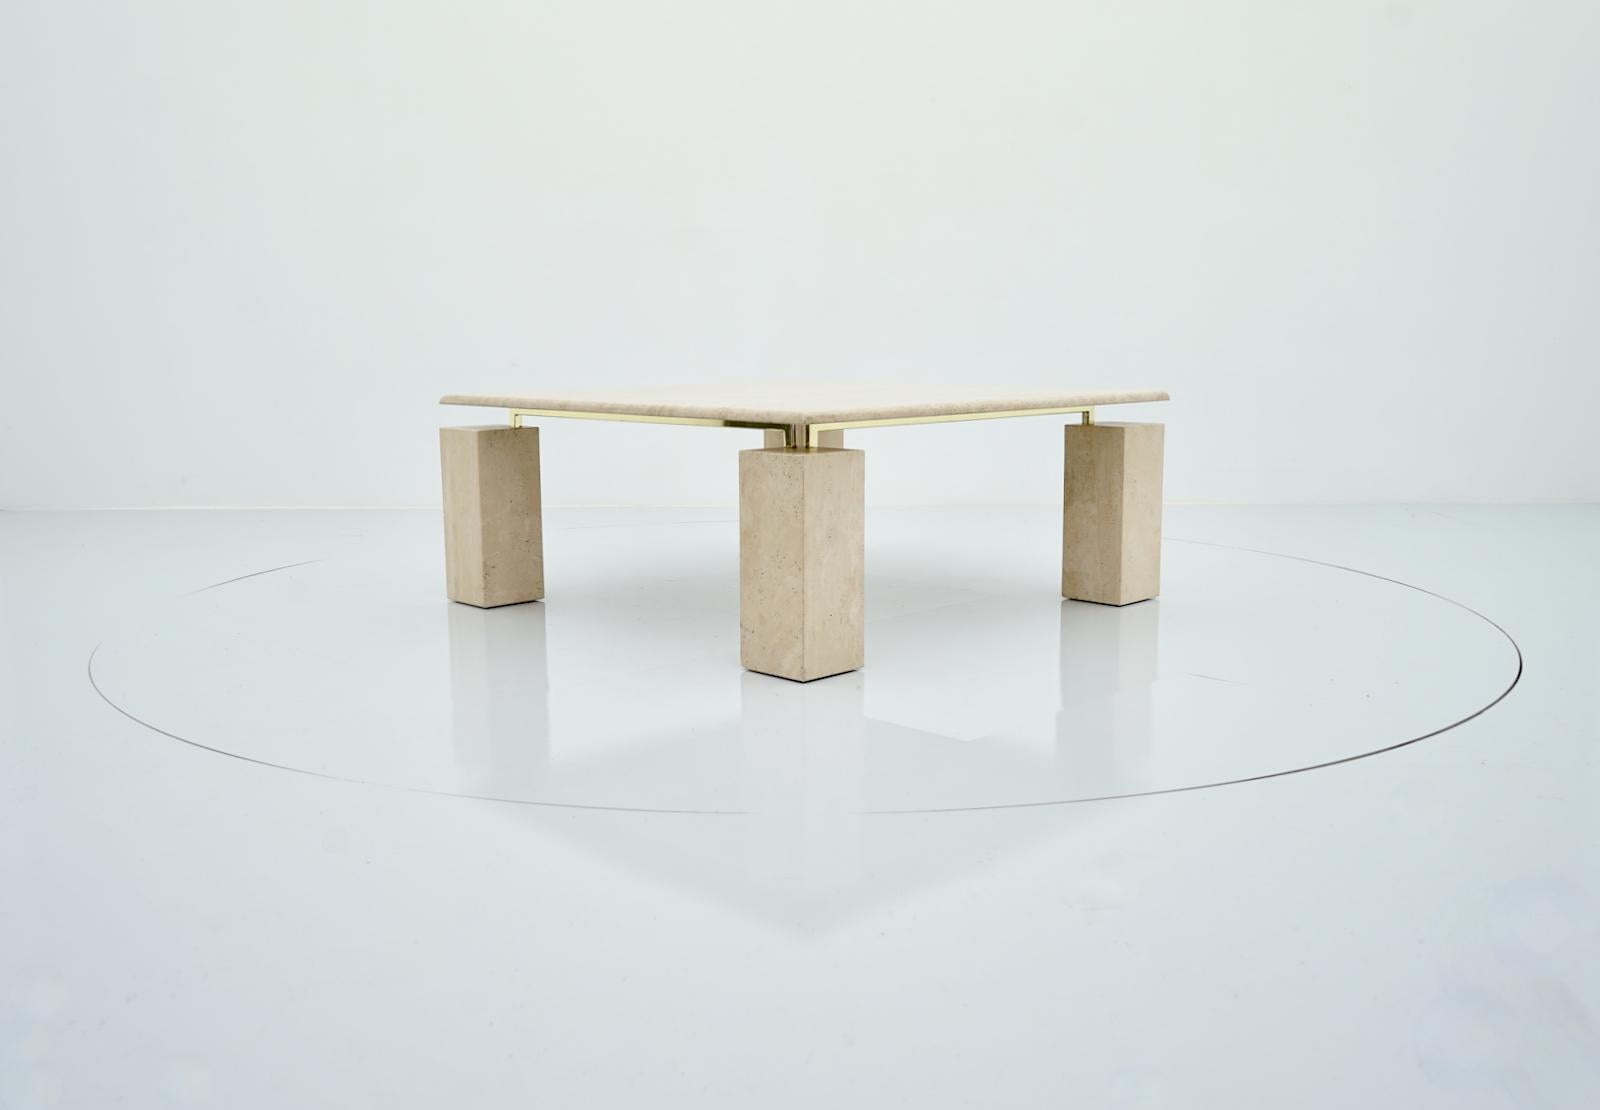 European Square Coffee Table in Italian Travertine with Floating Table Top, 1970s For Sale